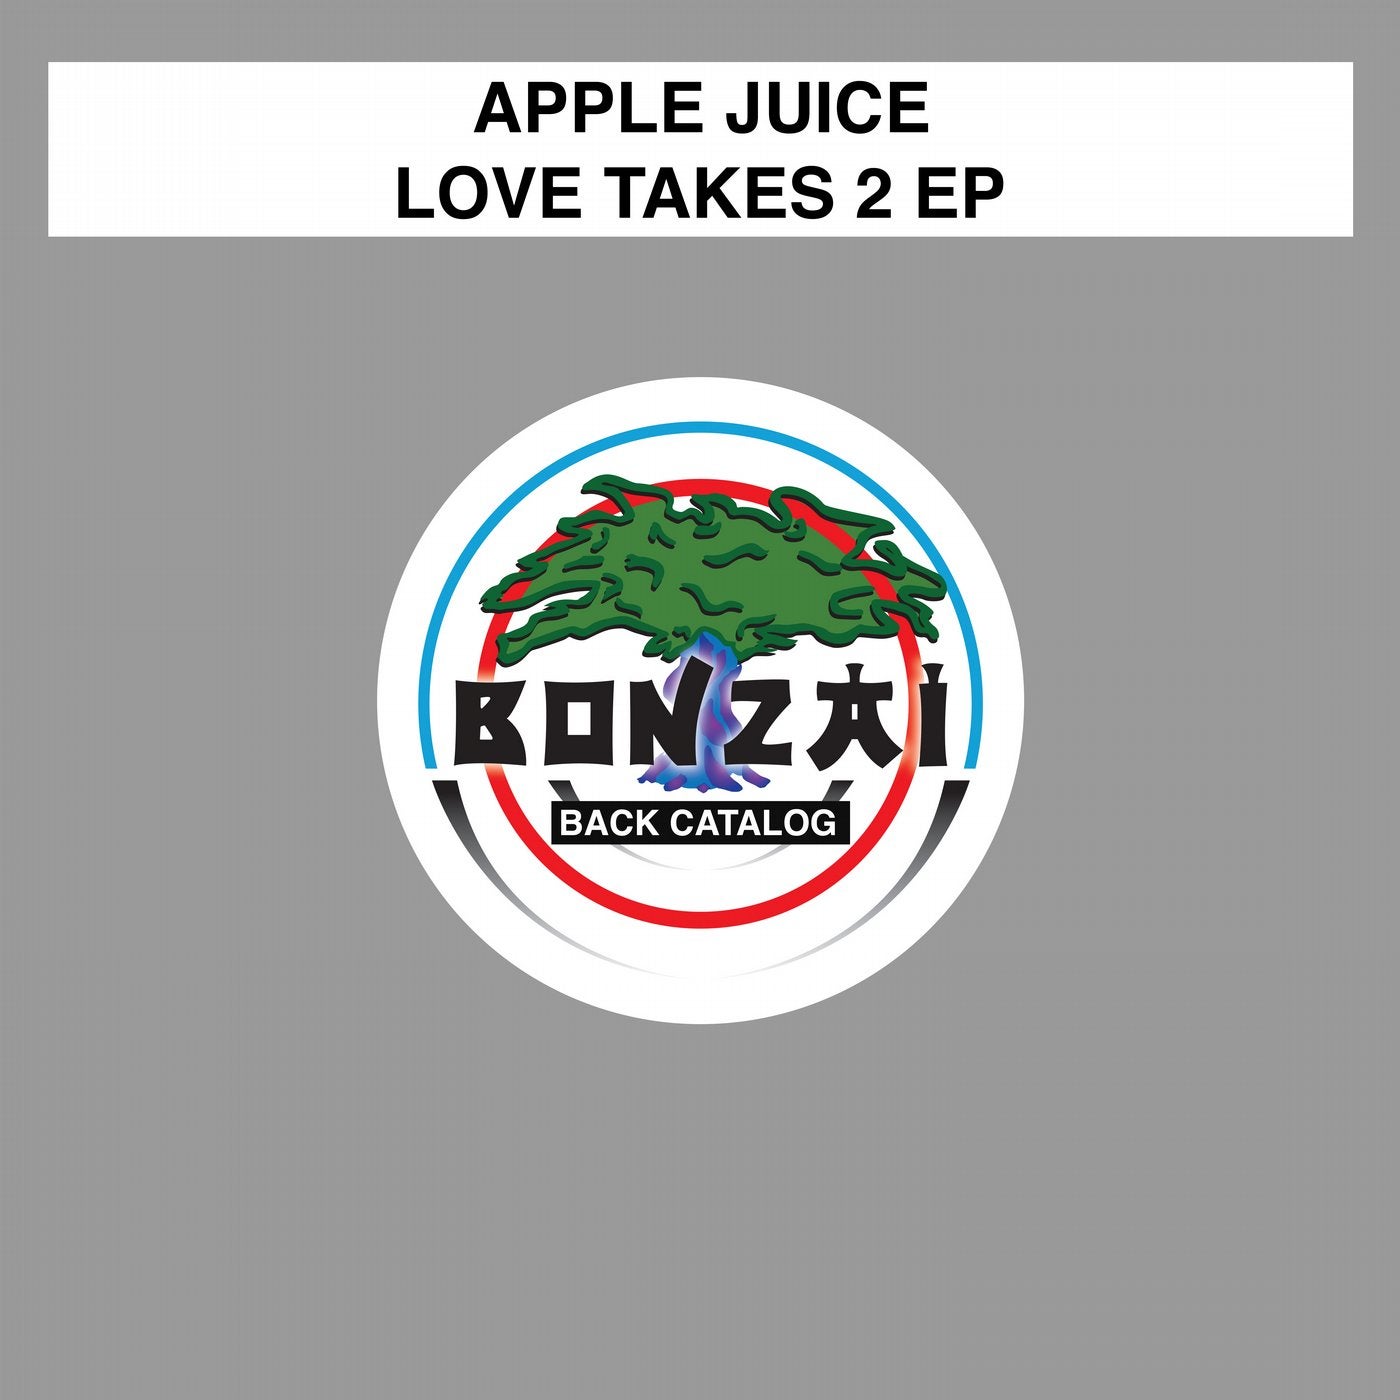 Love Takes 2 EP